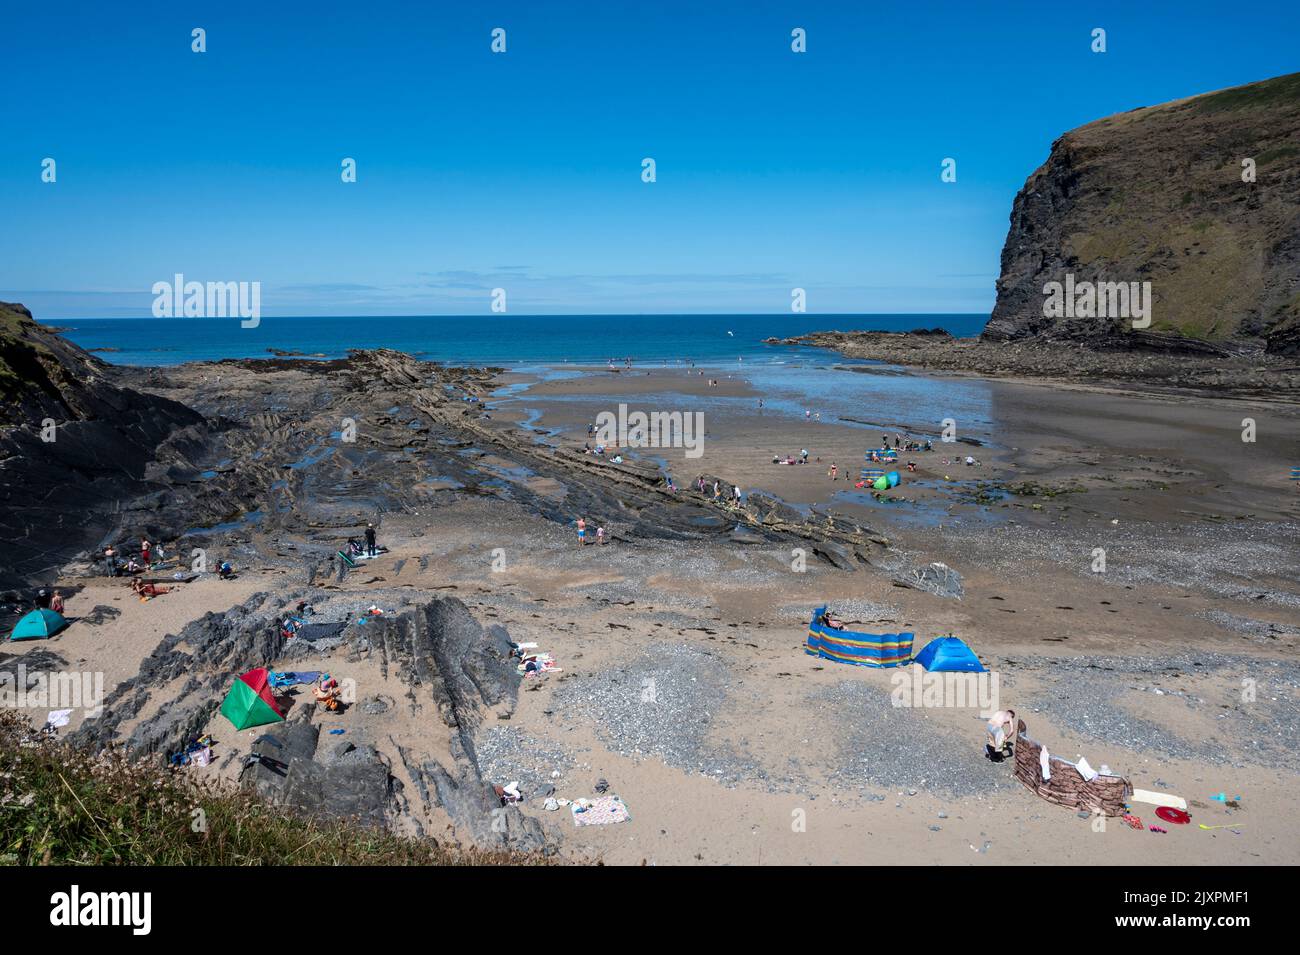 View of Crackington Haven Beach with holiday makers enjoying the sun and sea. In the background is Penkenna Point. Stock Photo